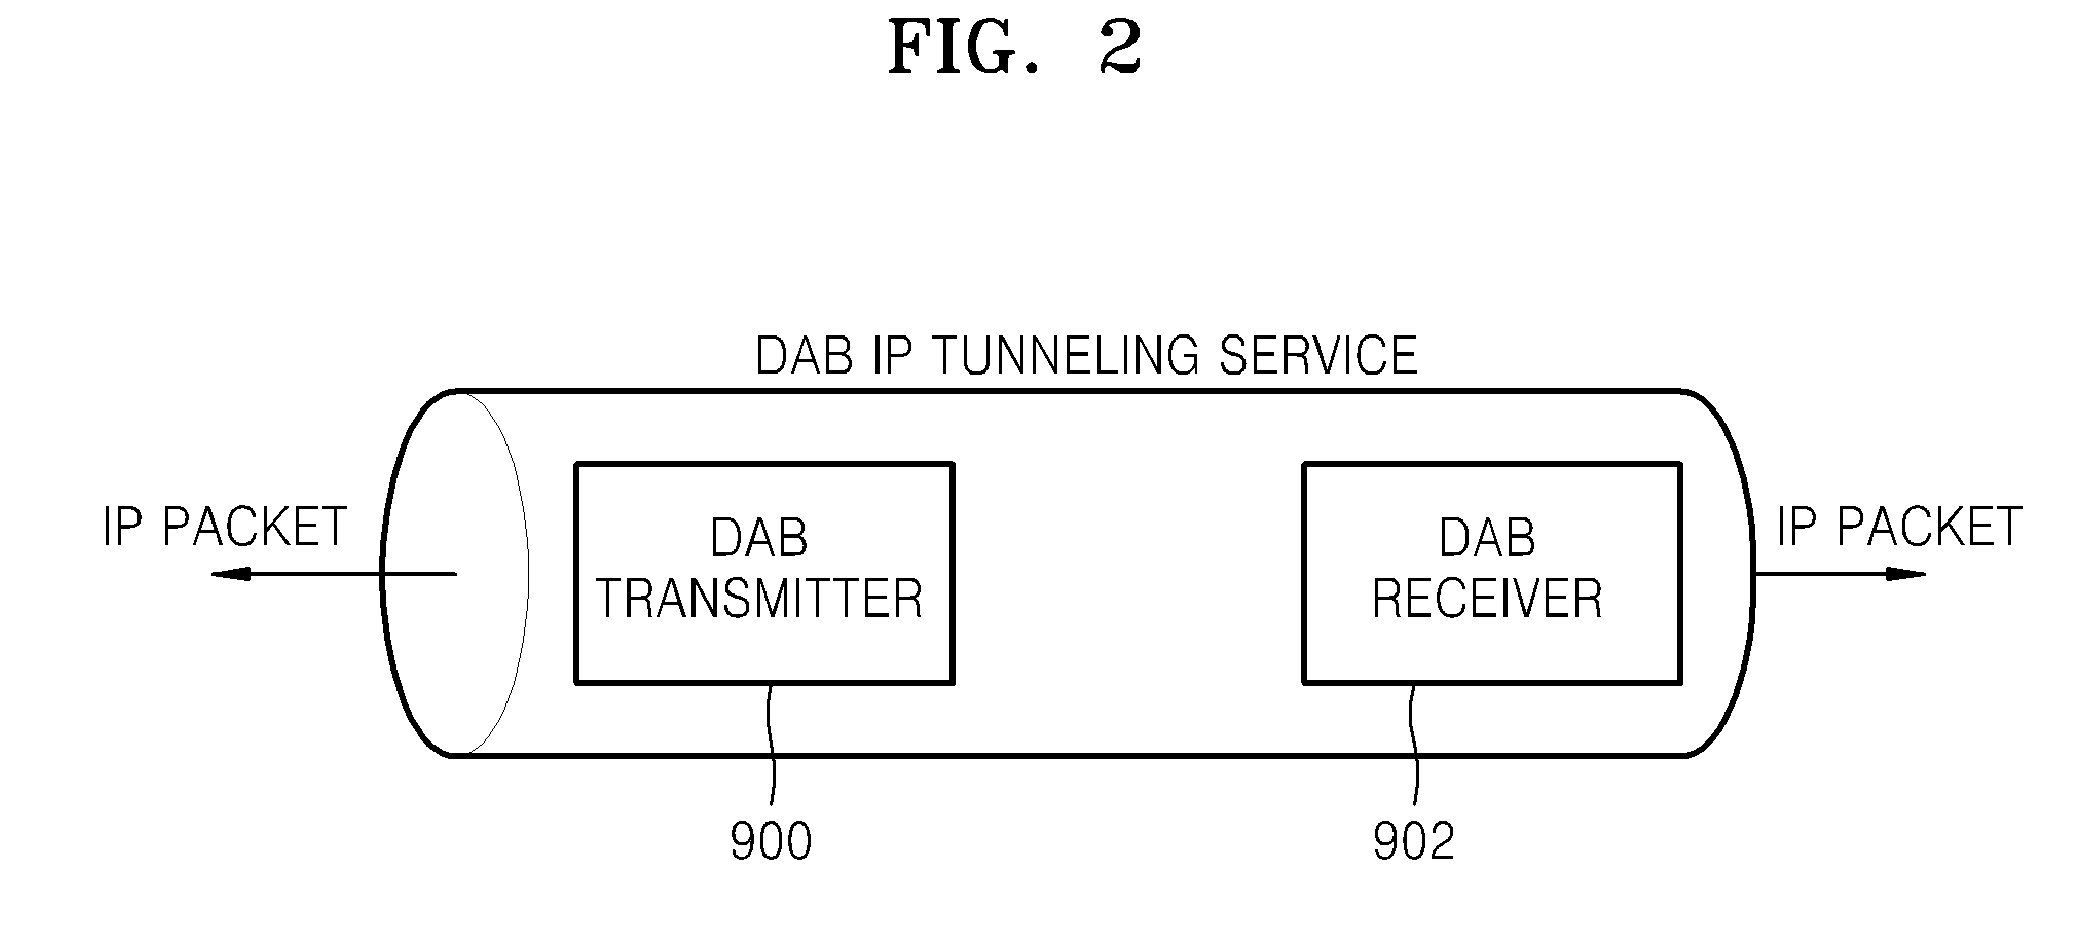 Method and Apparatus For Providing Ip Datacasting Service in Digital Audio Broadcasting System